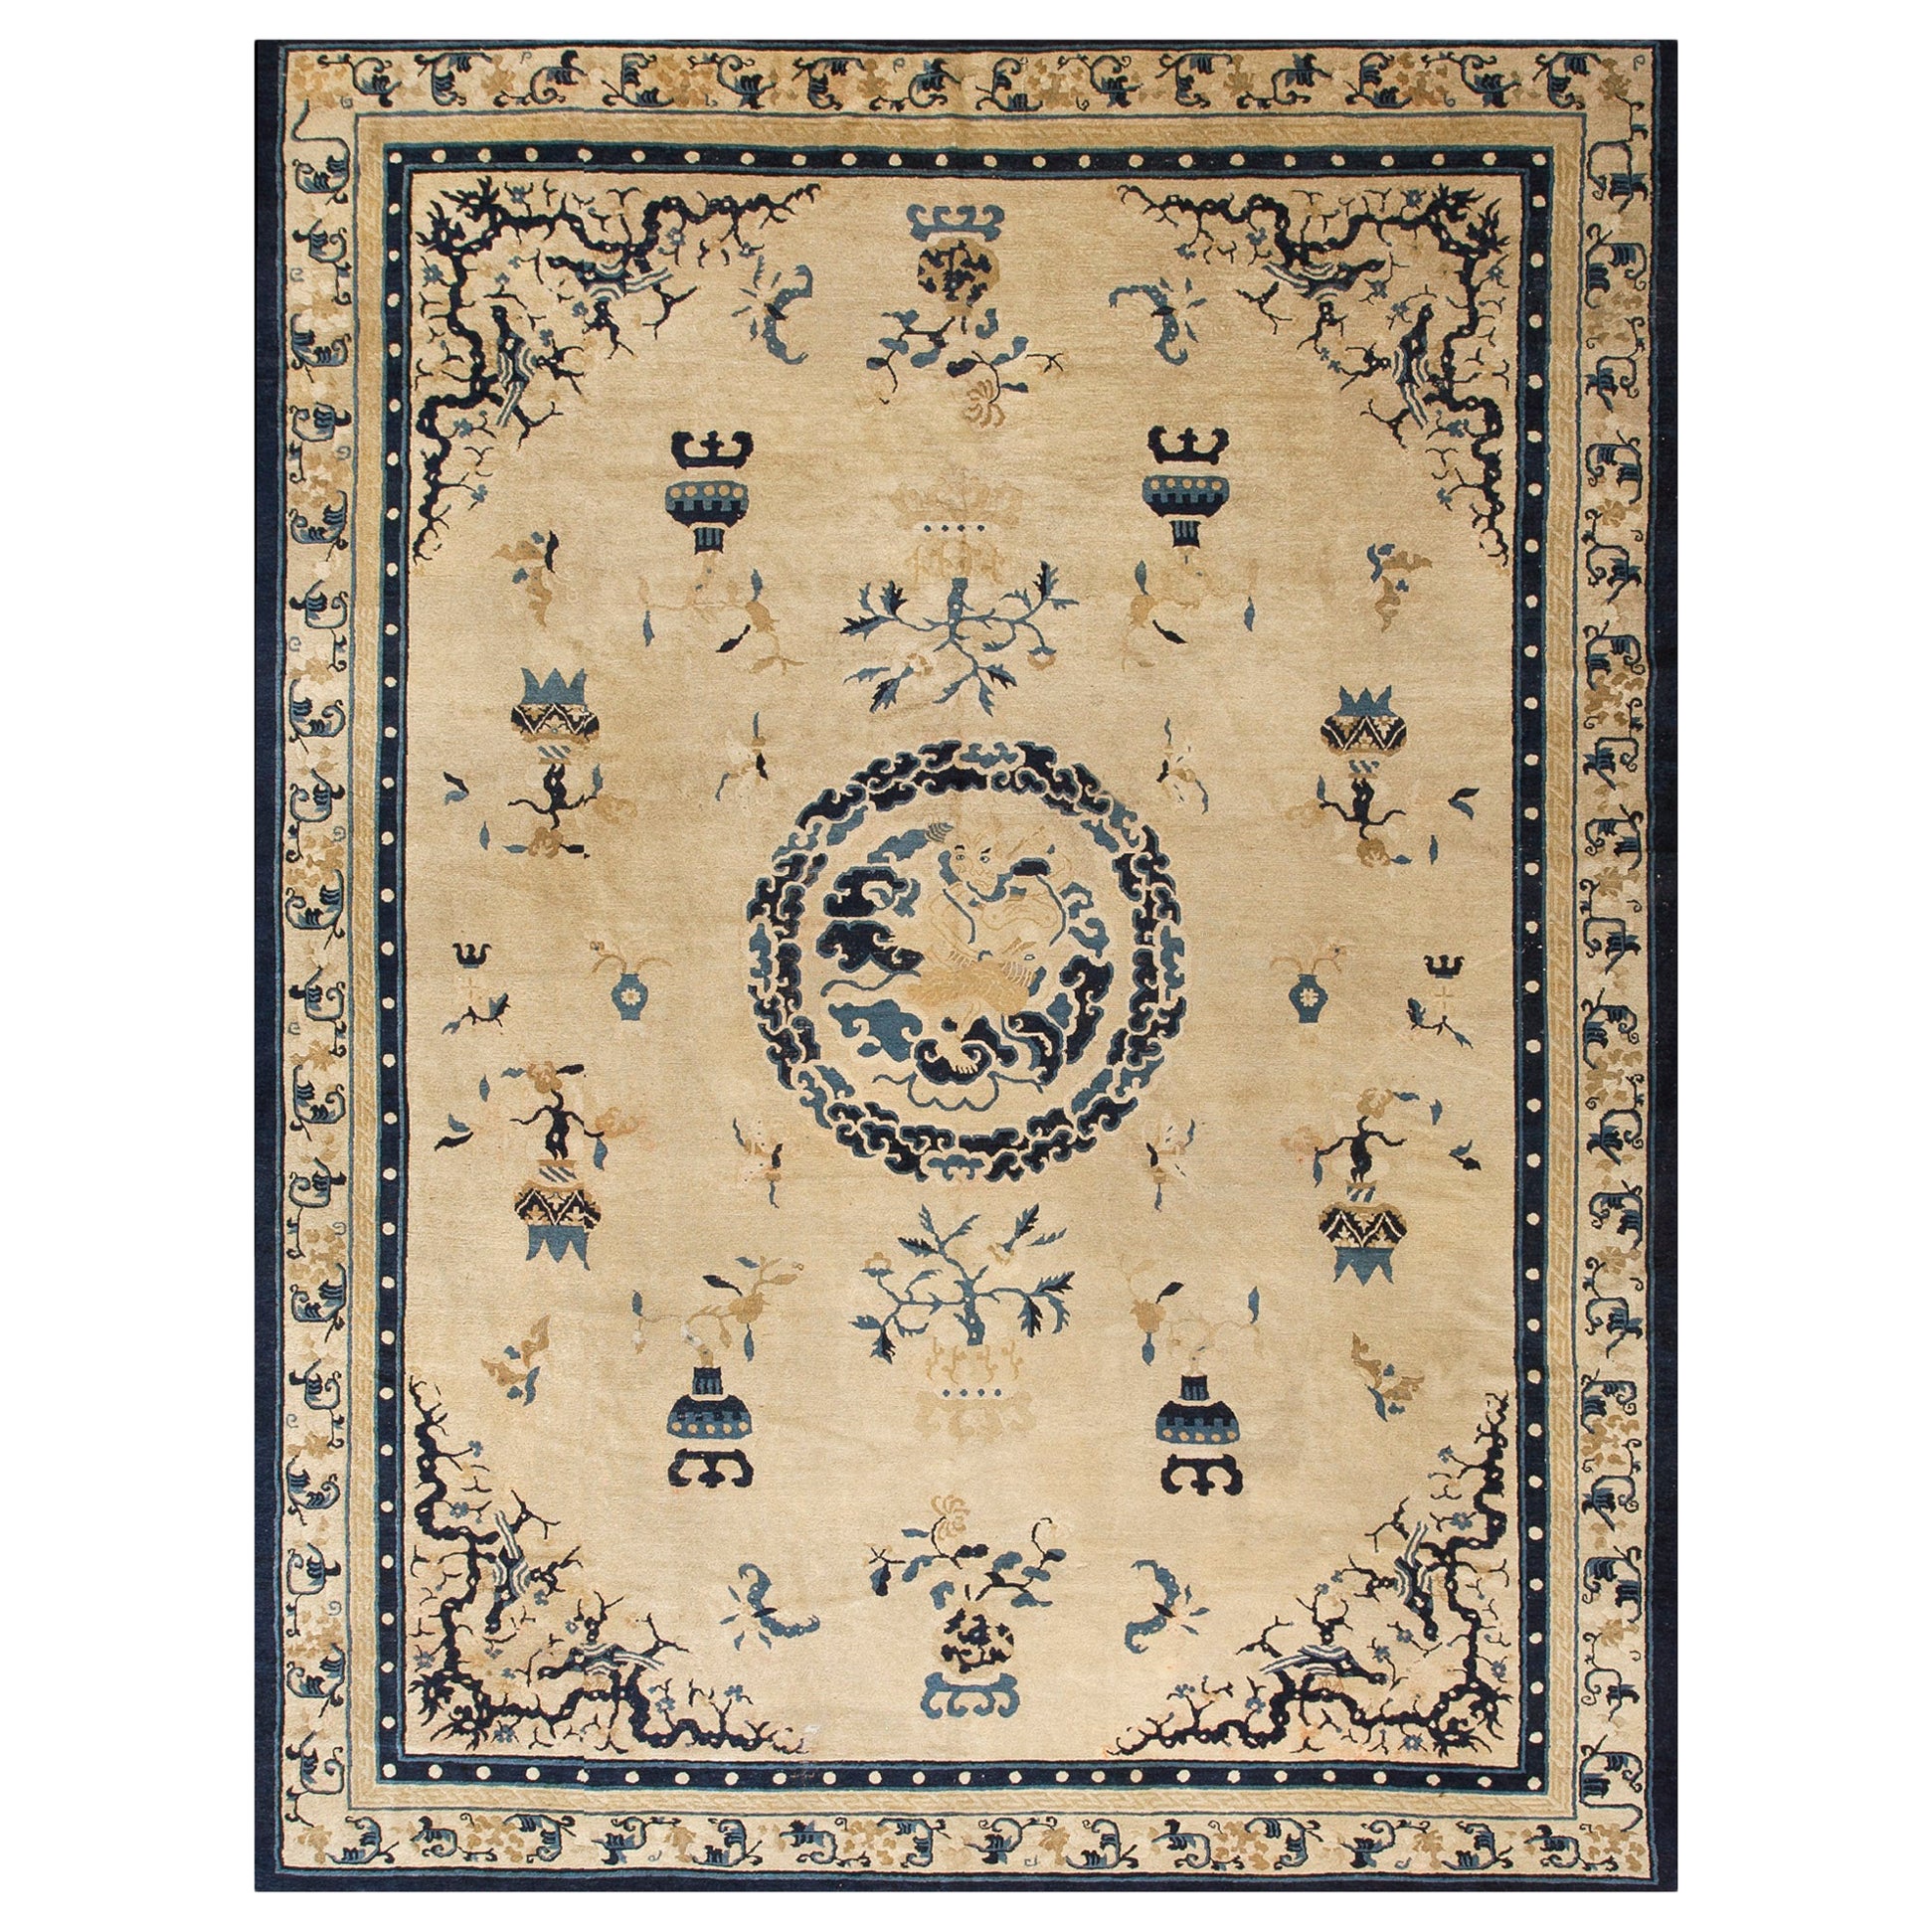 Late 19th Century Chinese Peking Carpet ( 8'8" x 11'5" - 264 x 248 ) For Sale